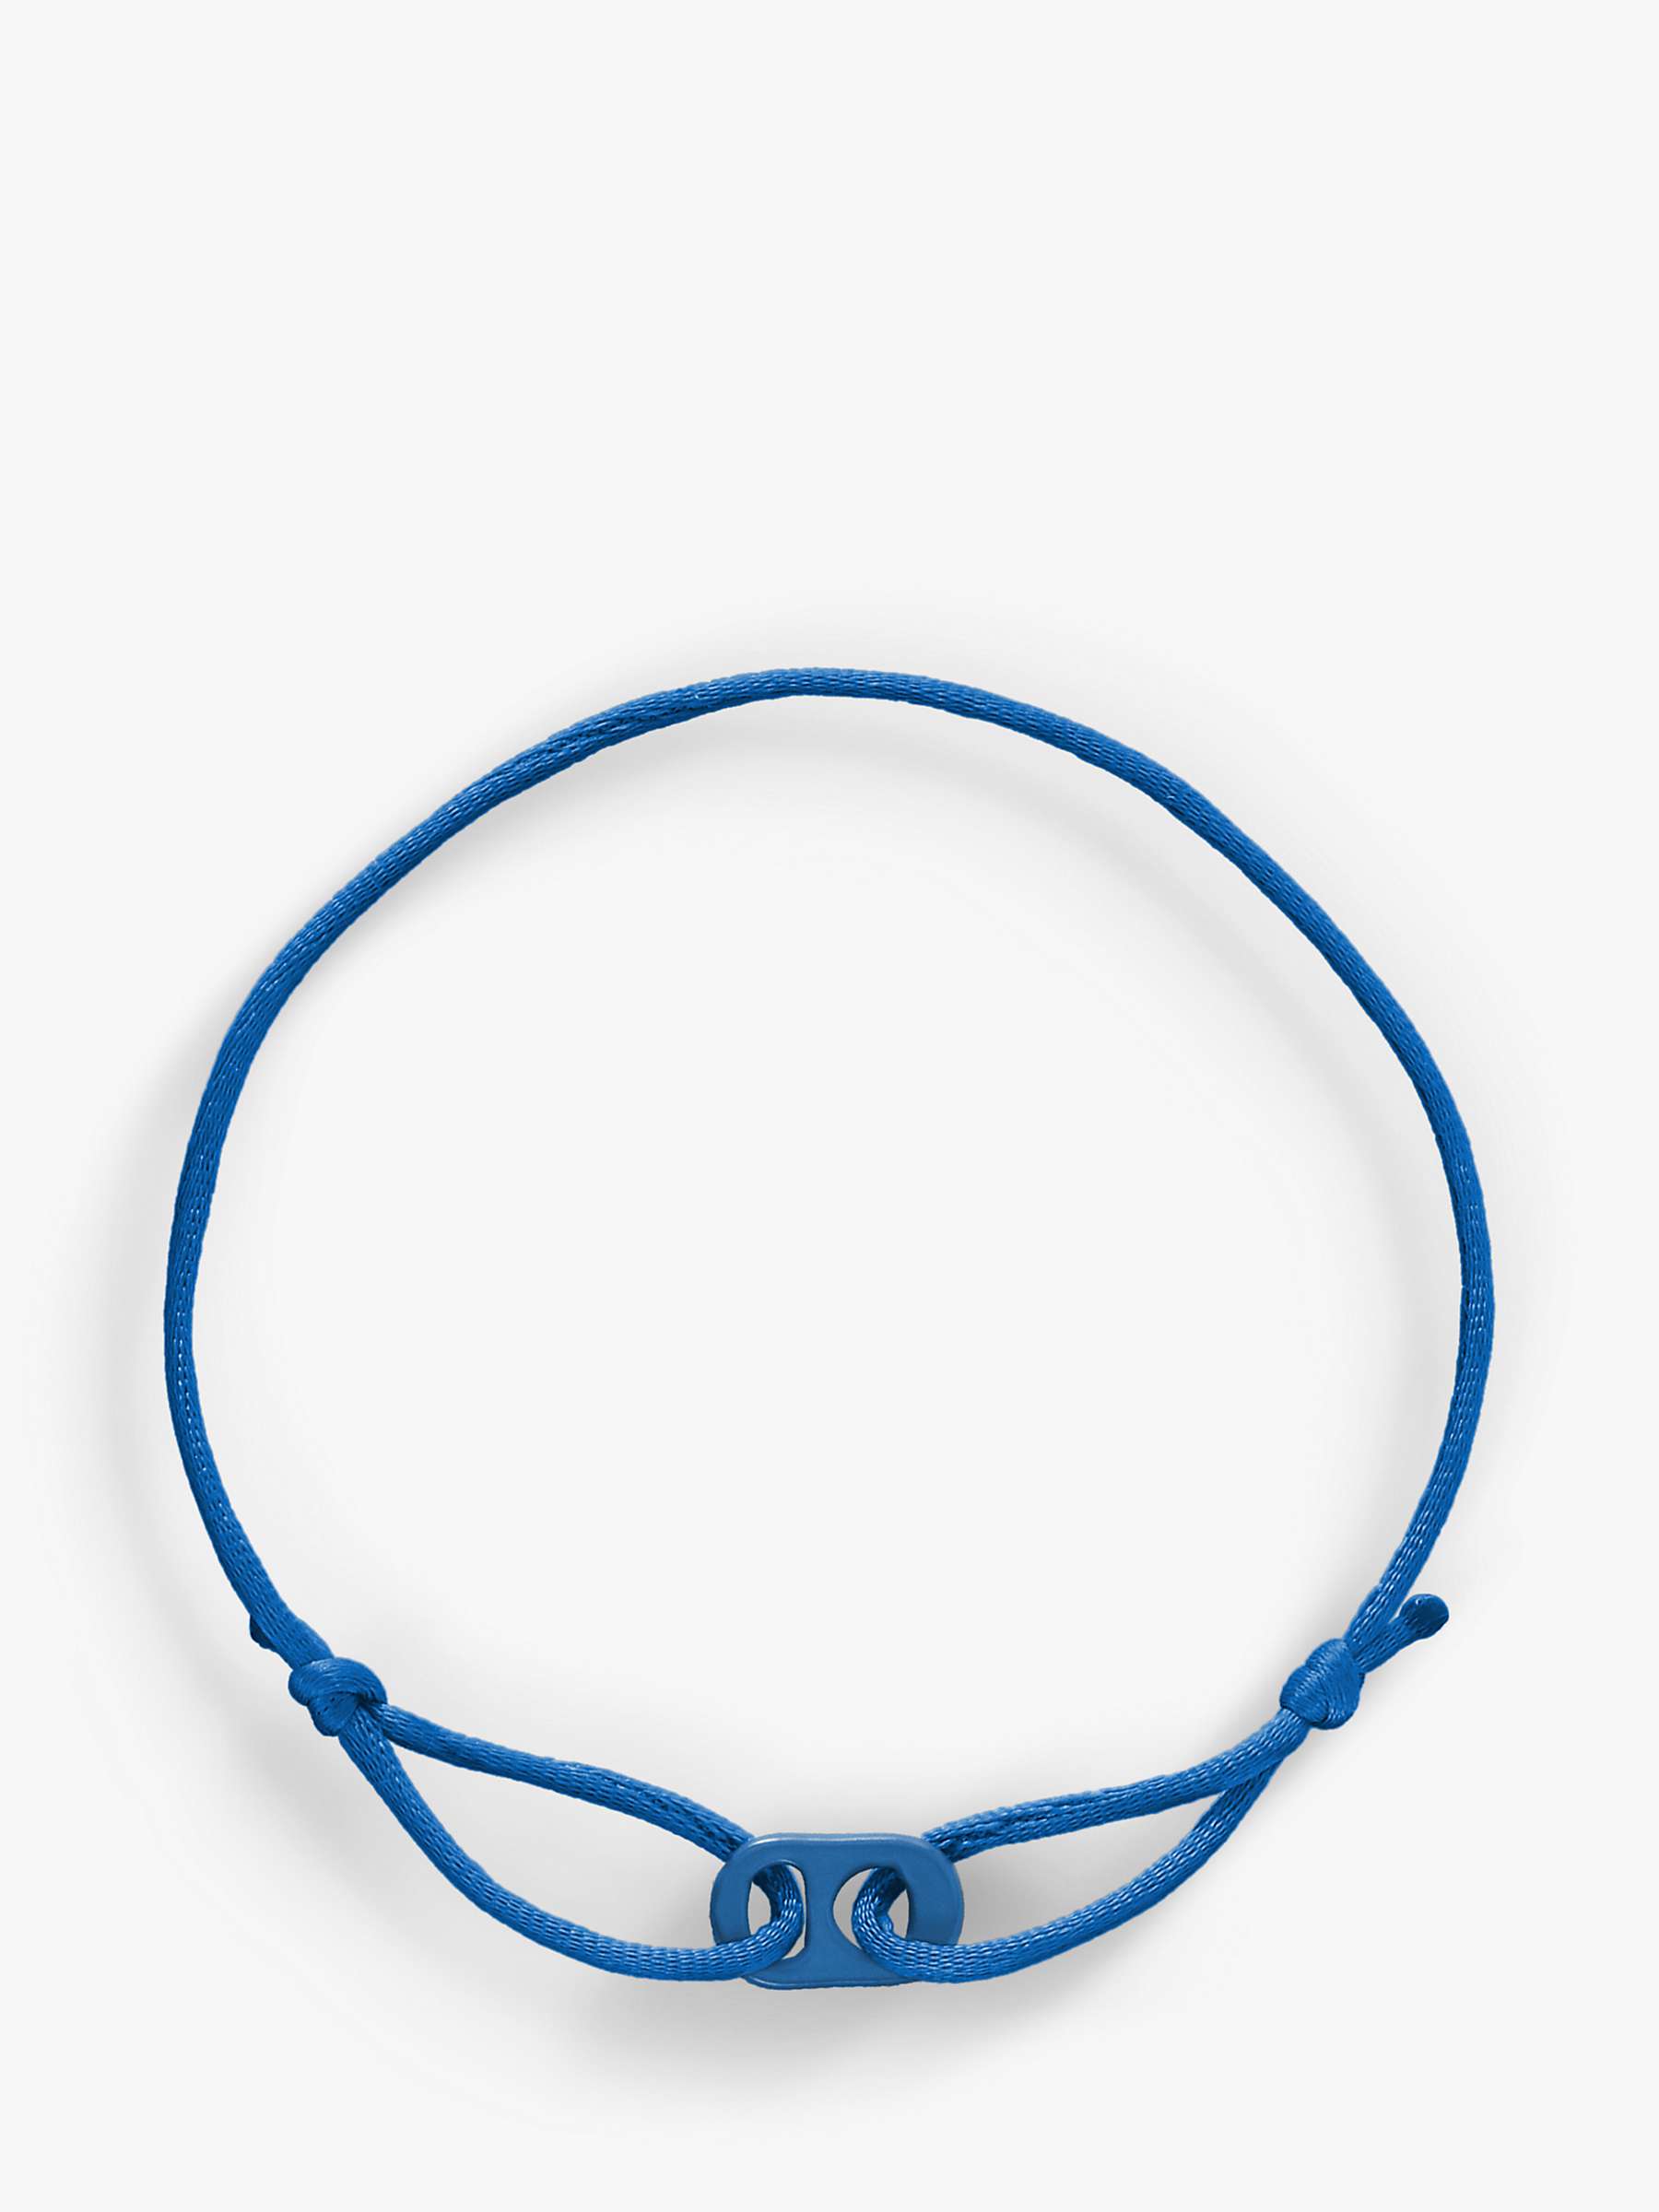 Buy #TOGETHERBAND UN Goal 16 - Peace, Justice and Strong Institutions Recycled Plastic Mini Bracelet, Pack of 2, Indigo Online at johnlewis.com